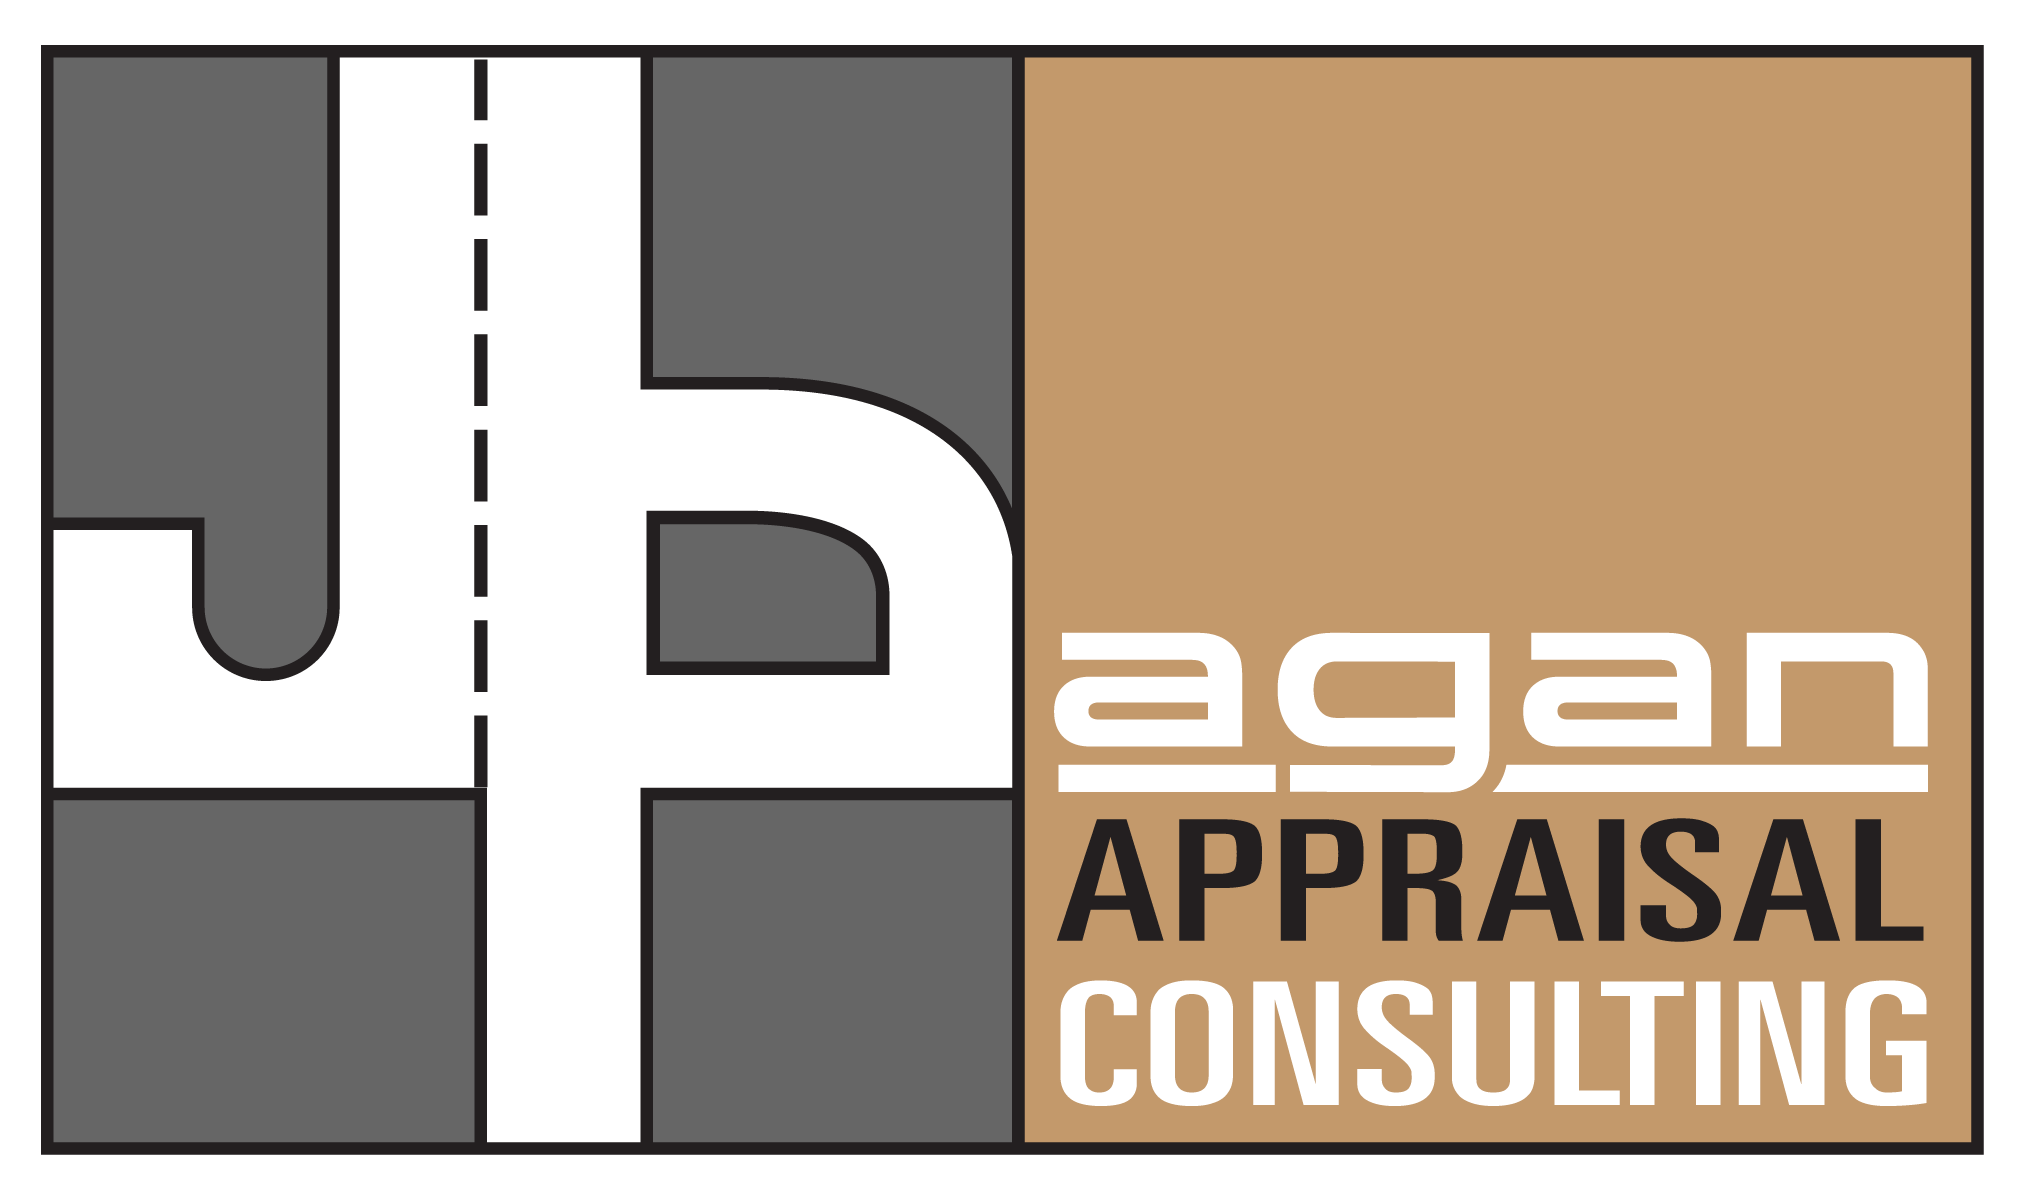 Jorge Pagan Appraisal Consulting